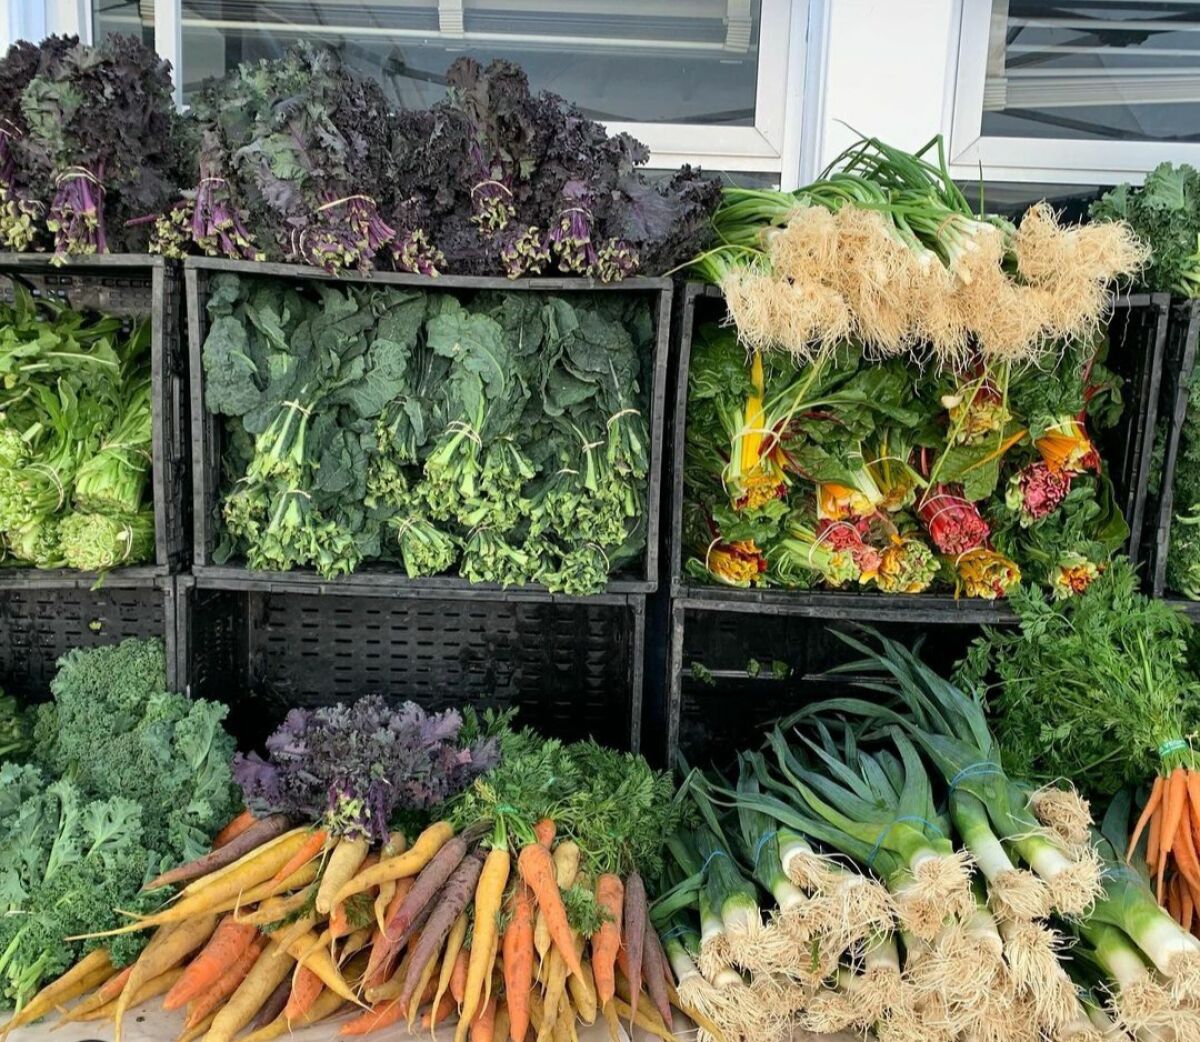 The La Jolla Open Aire Market provides a variety of organic and conventional produce from 30 farmers.